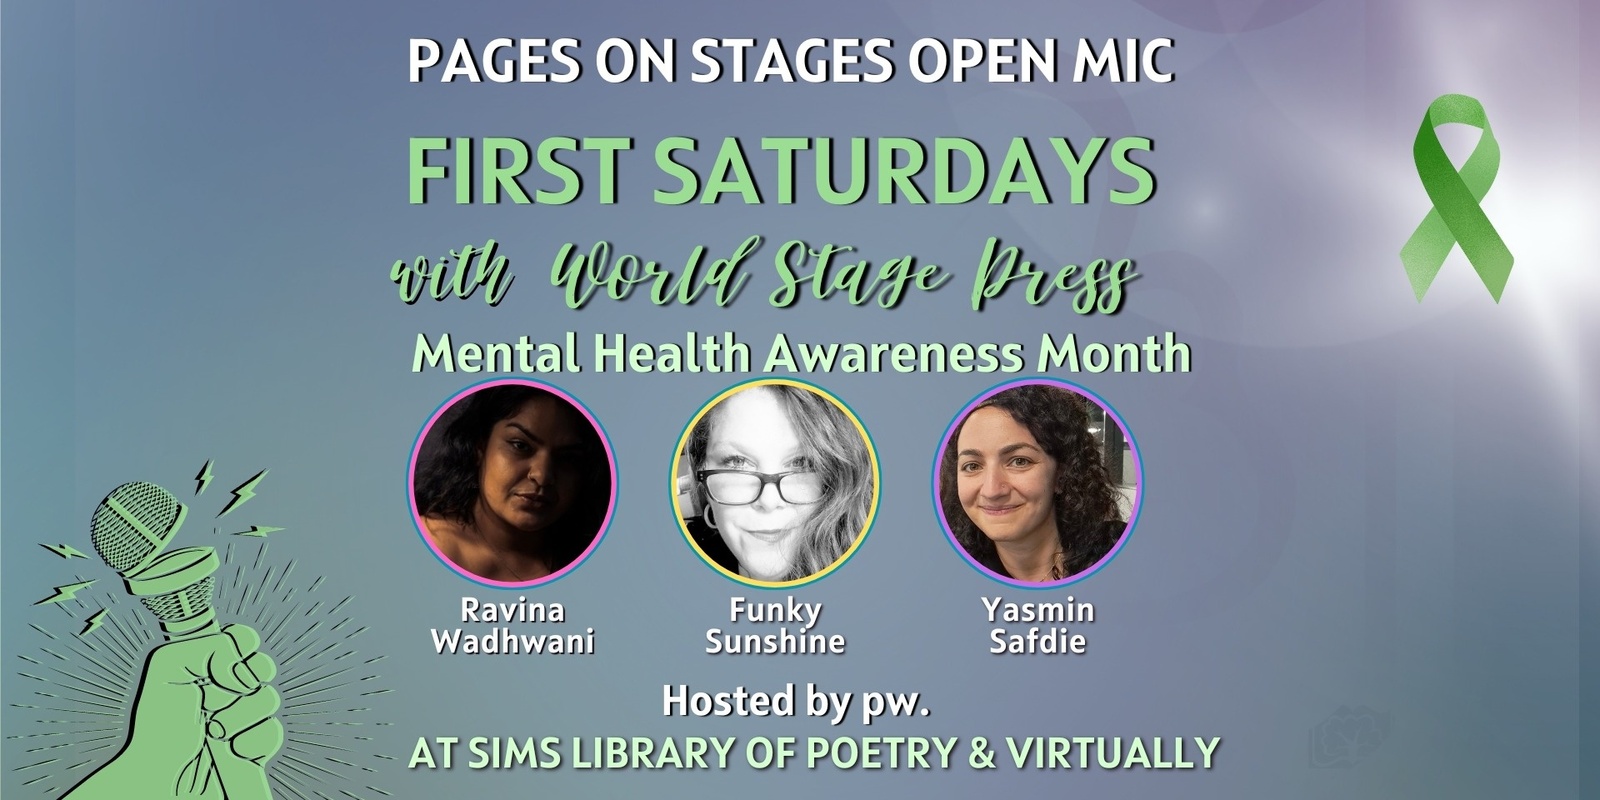 Banner image for Pages on Stages Open Mic 1st Saturdays with World Stage Press